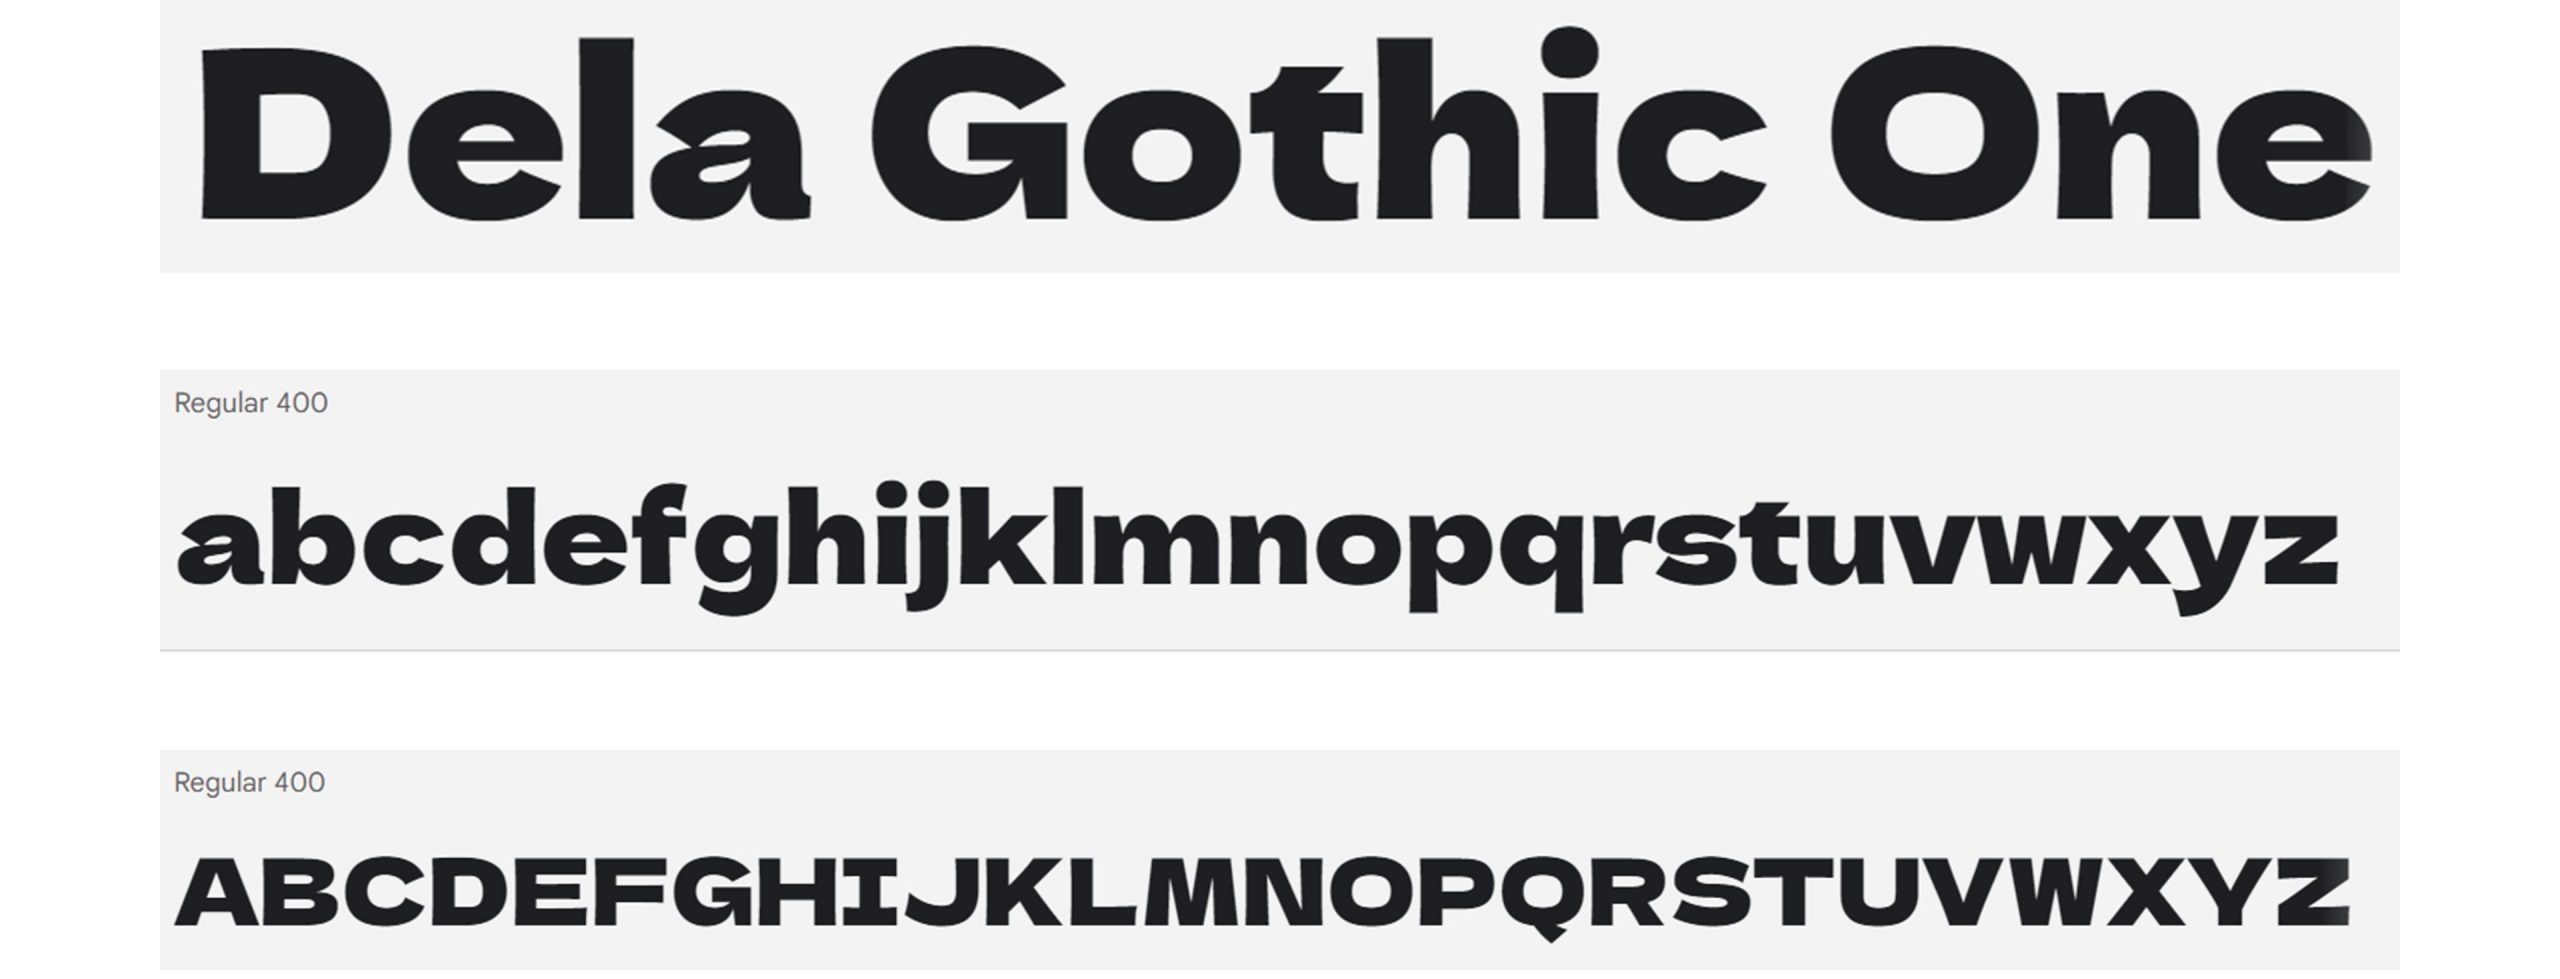 Google fonts screenshot Dela Gothic One A to Z